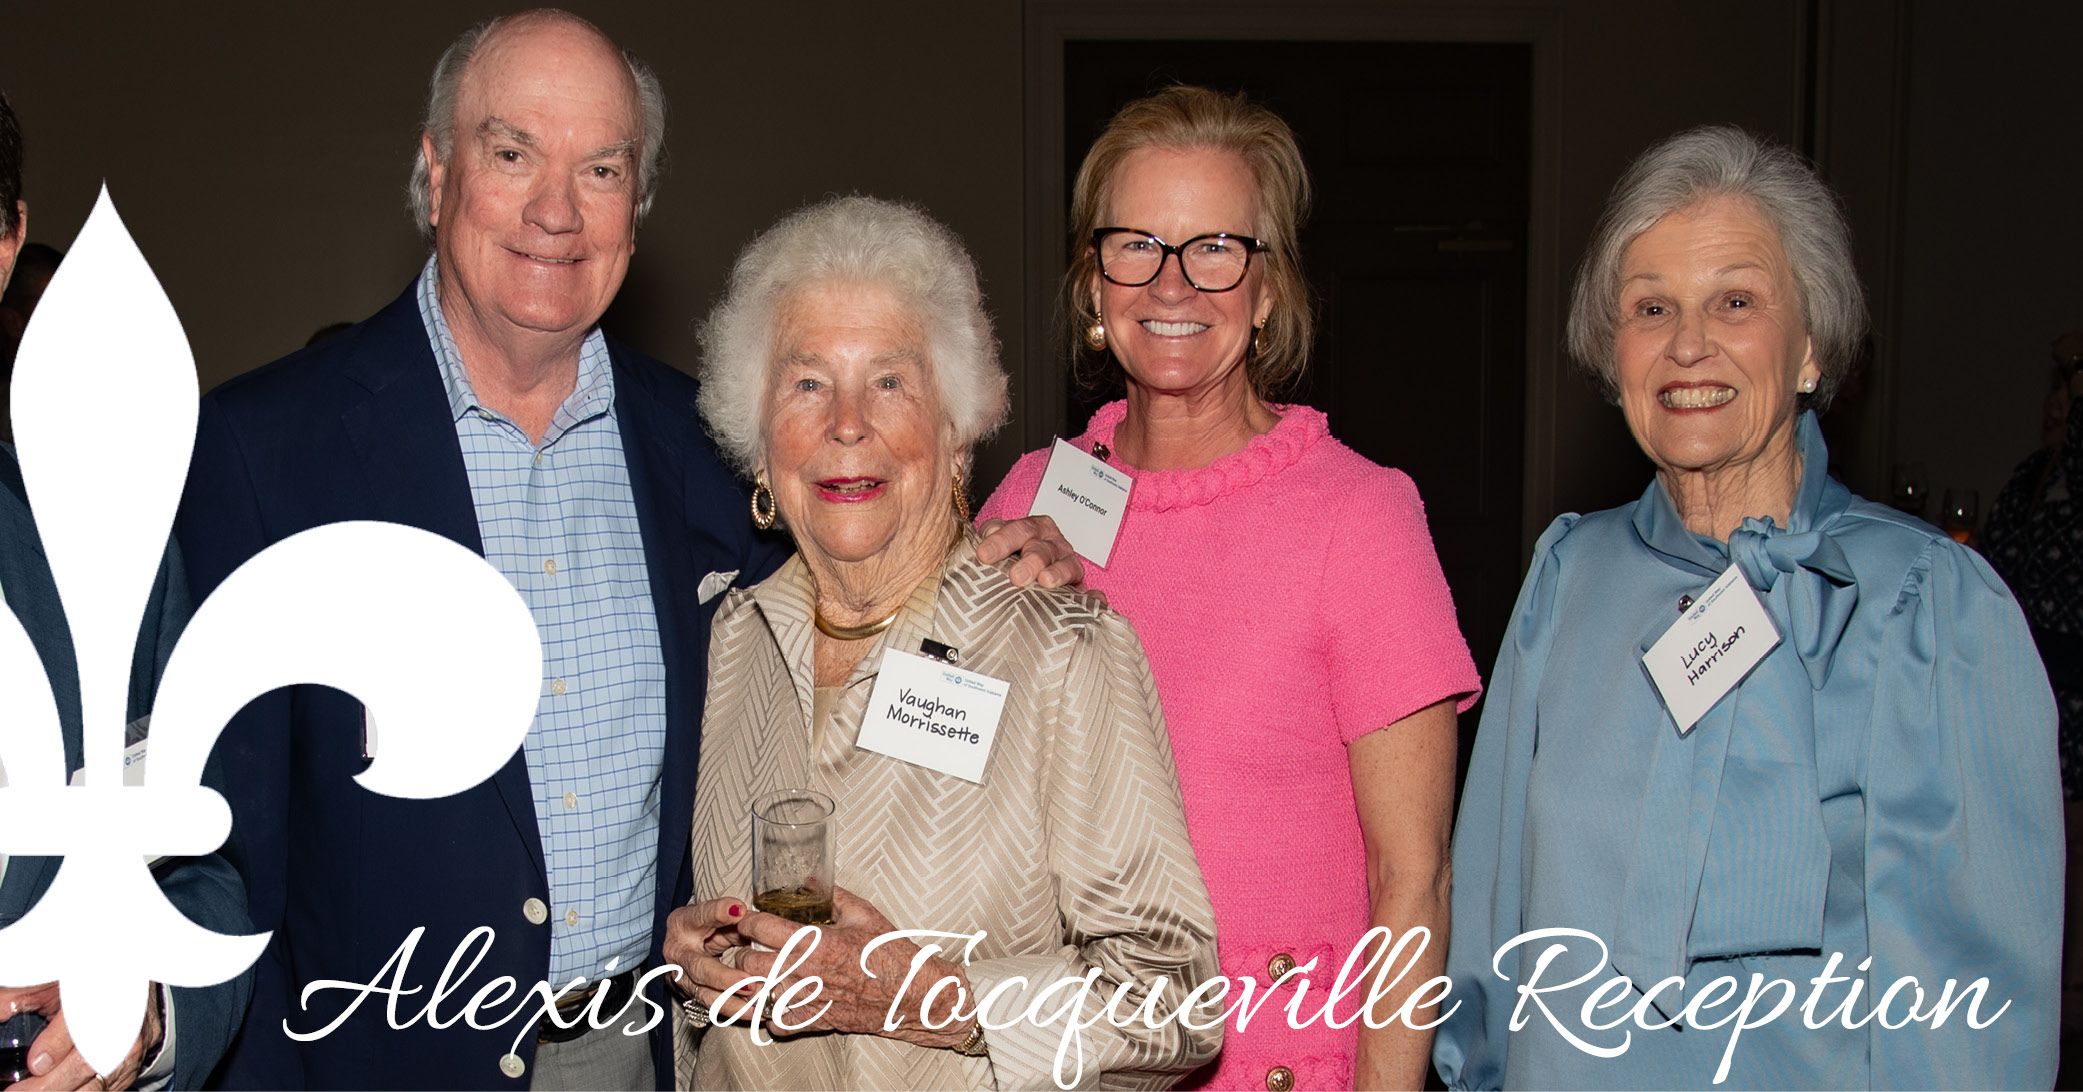 Alexis DeTocqueville Reception. Pictured from left to right Jo Bullard, Vaughan Morrissette, Ashley O'Conner, and Lucy Harrison.